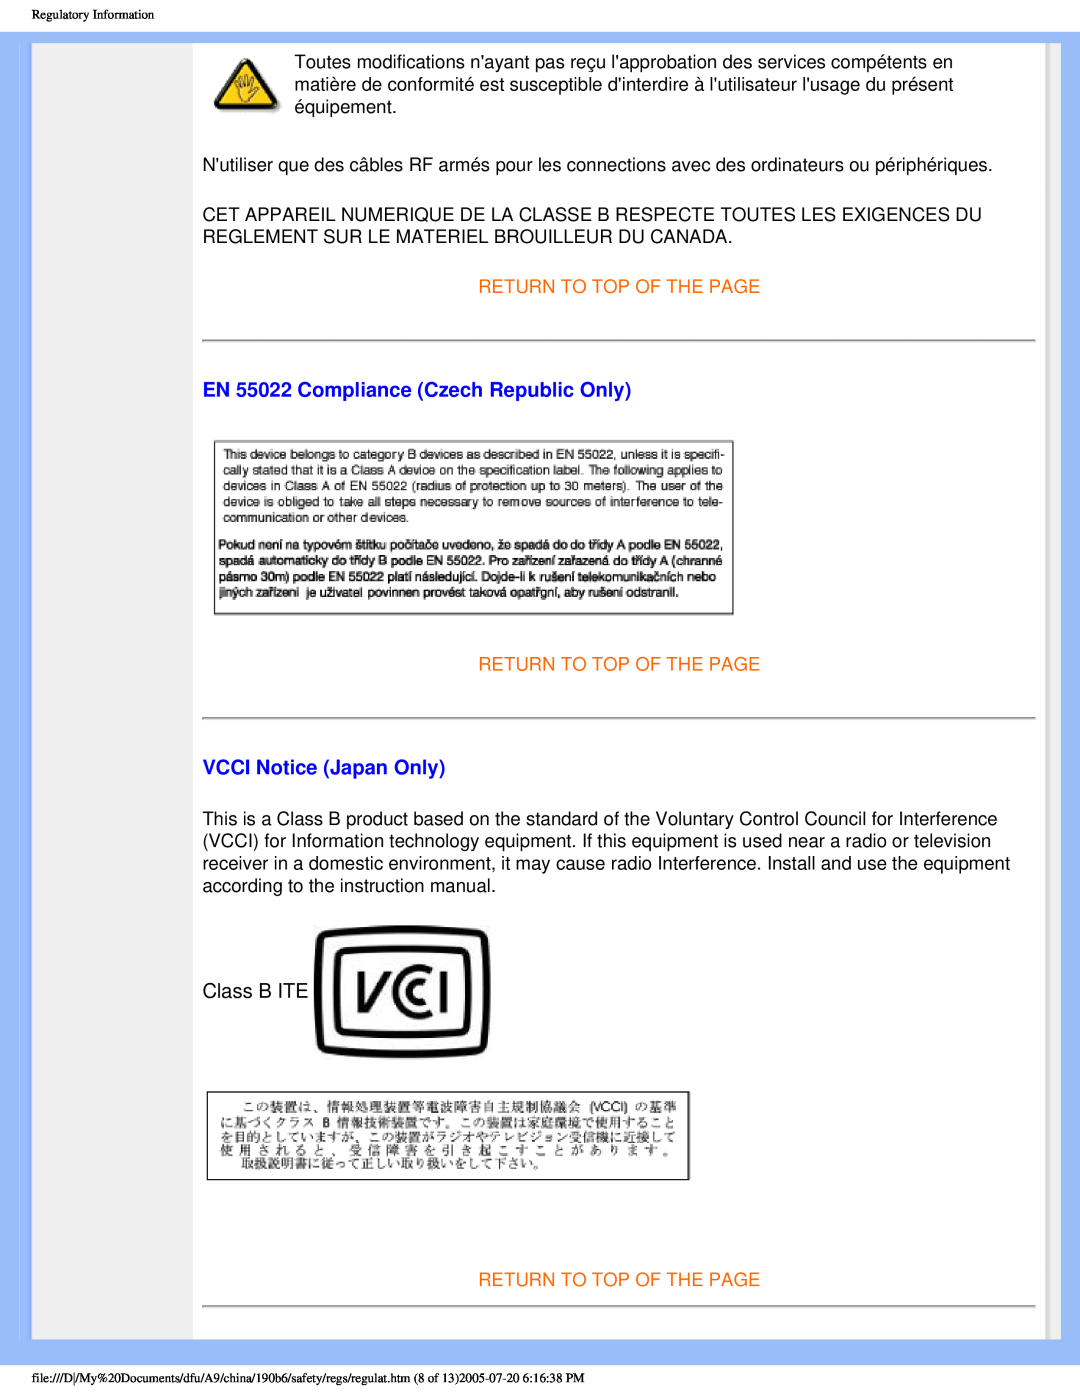 Philips 190B6 user manual EN 55022 Compliance Czech Republic Only, VCCI Notice Japan Only, Return To Top Of The Page 